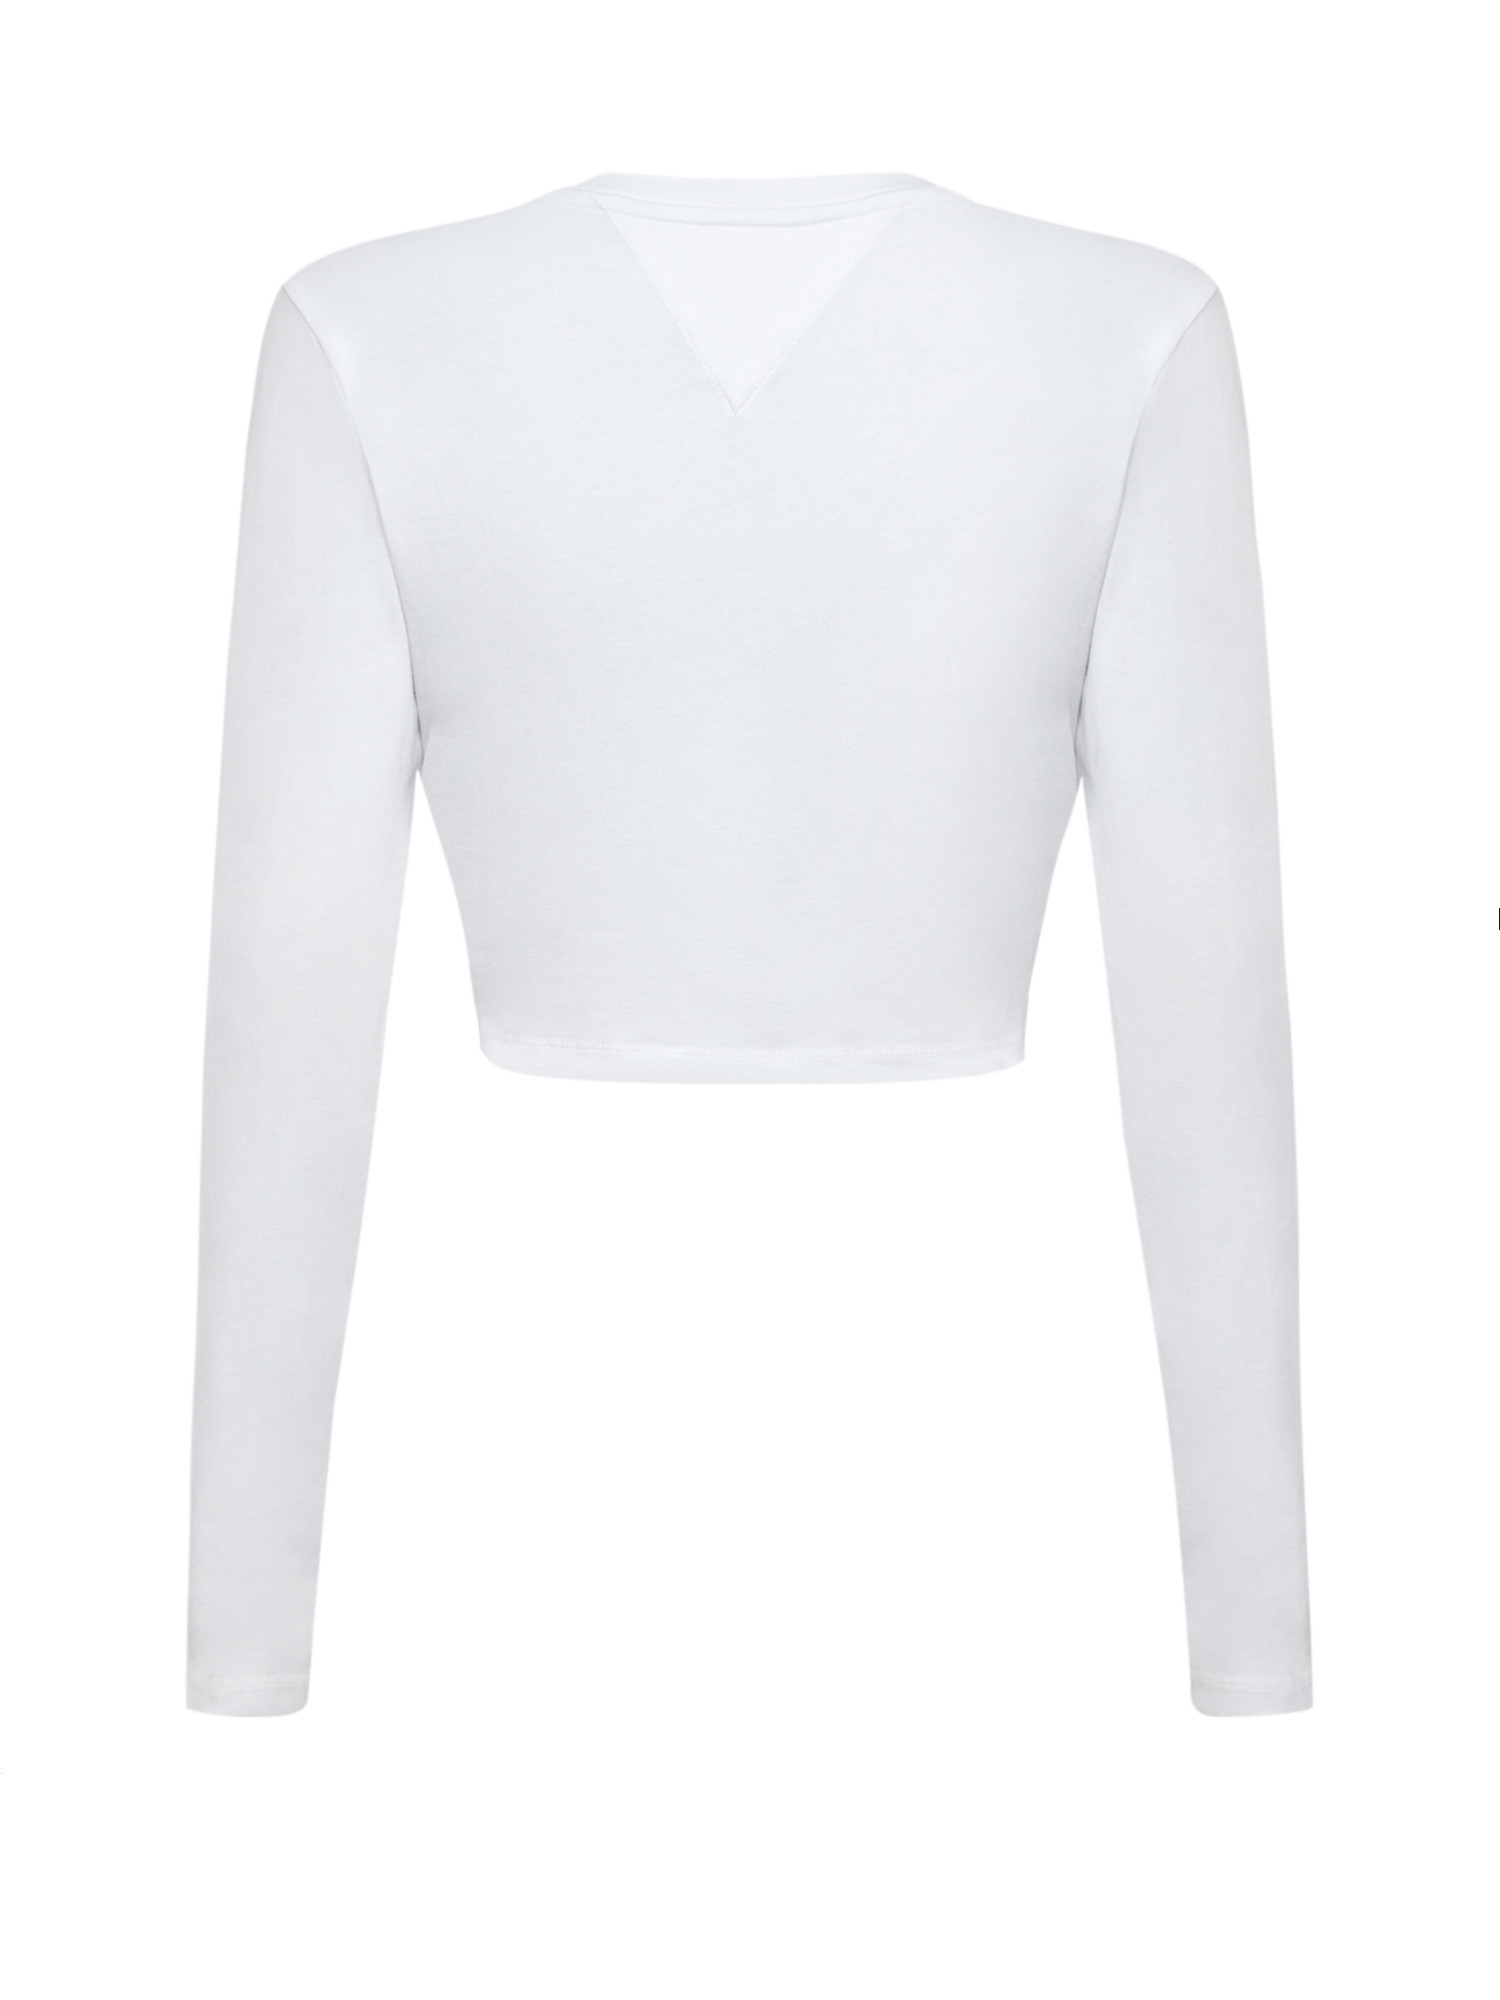 Tommy Jeans - Cotton crop top with logo, White, large image number 1